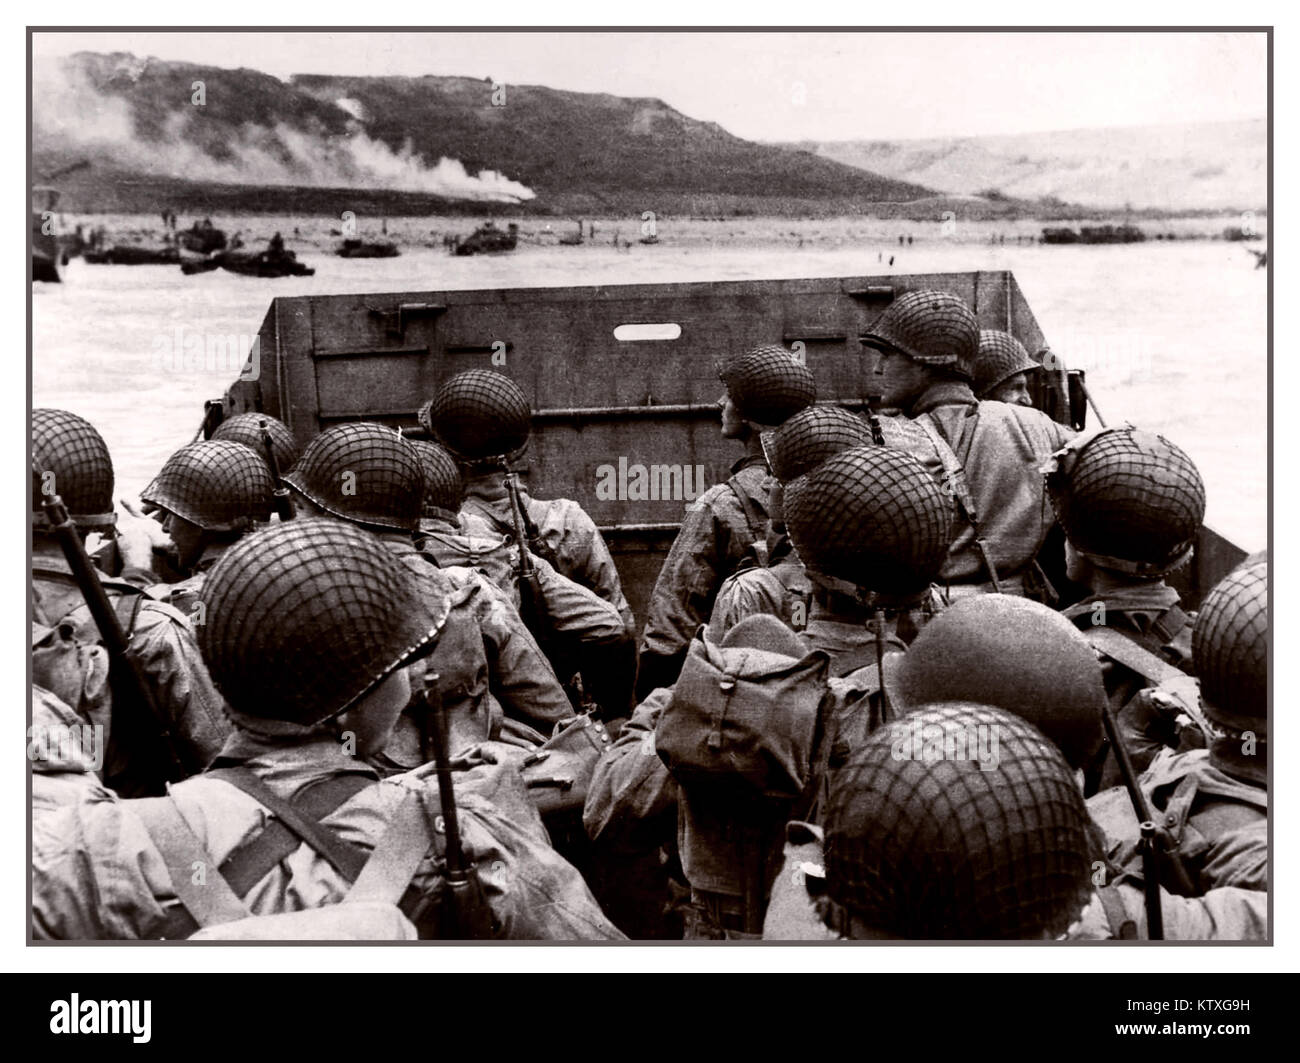 D-Day Omaha invasion beach landing craft under dull skies with American troops in landing craft visually guided by smoke flares approaching Omaha Beach Normandy France 6th June 1944 Stock Photo